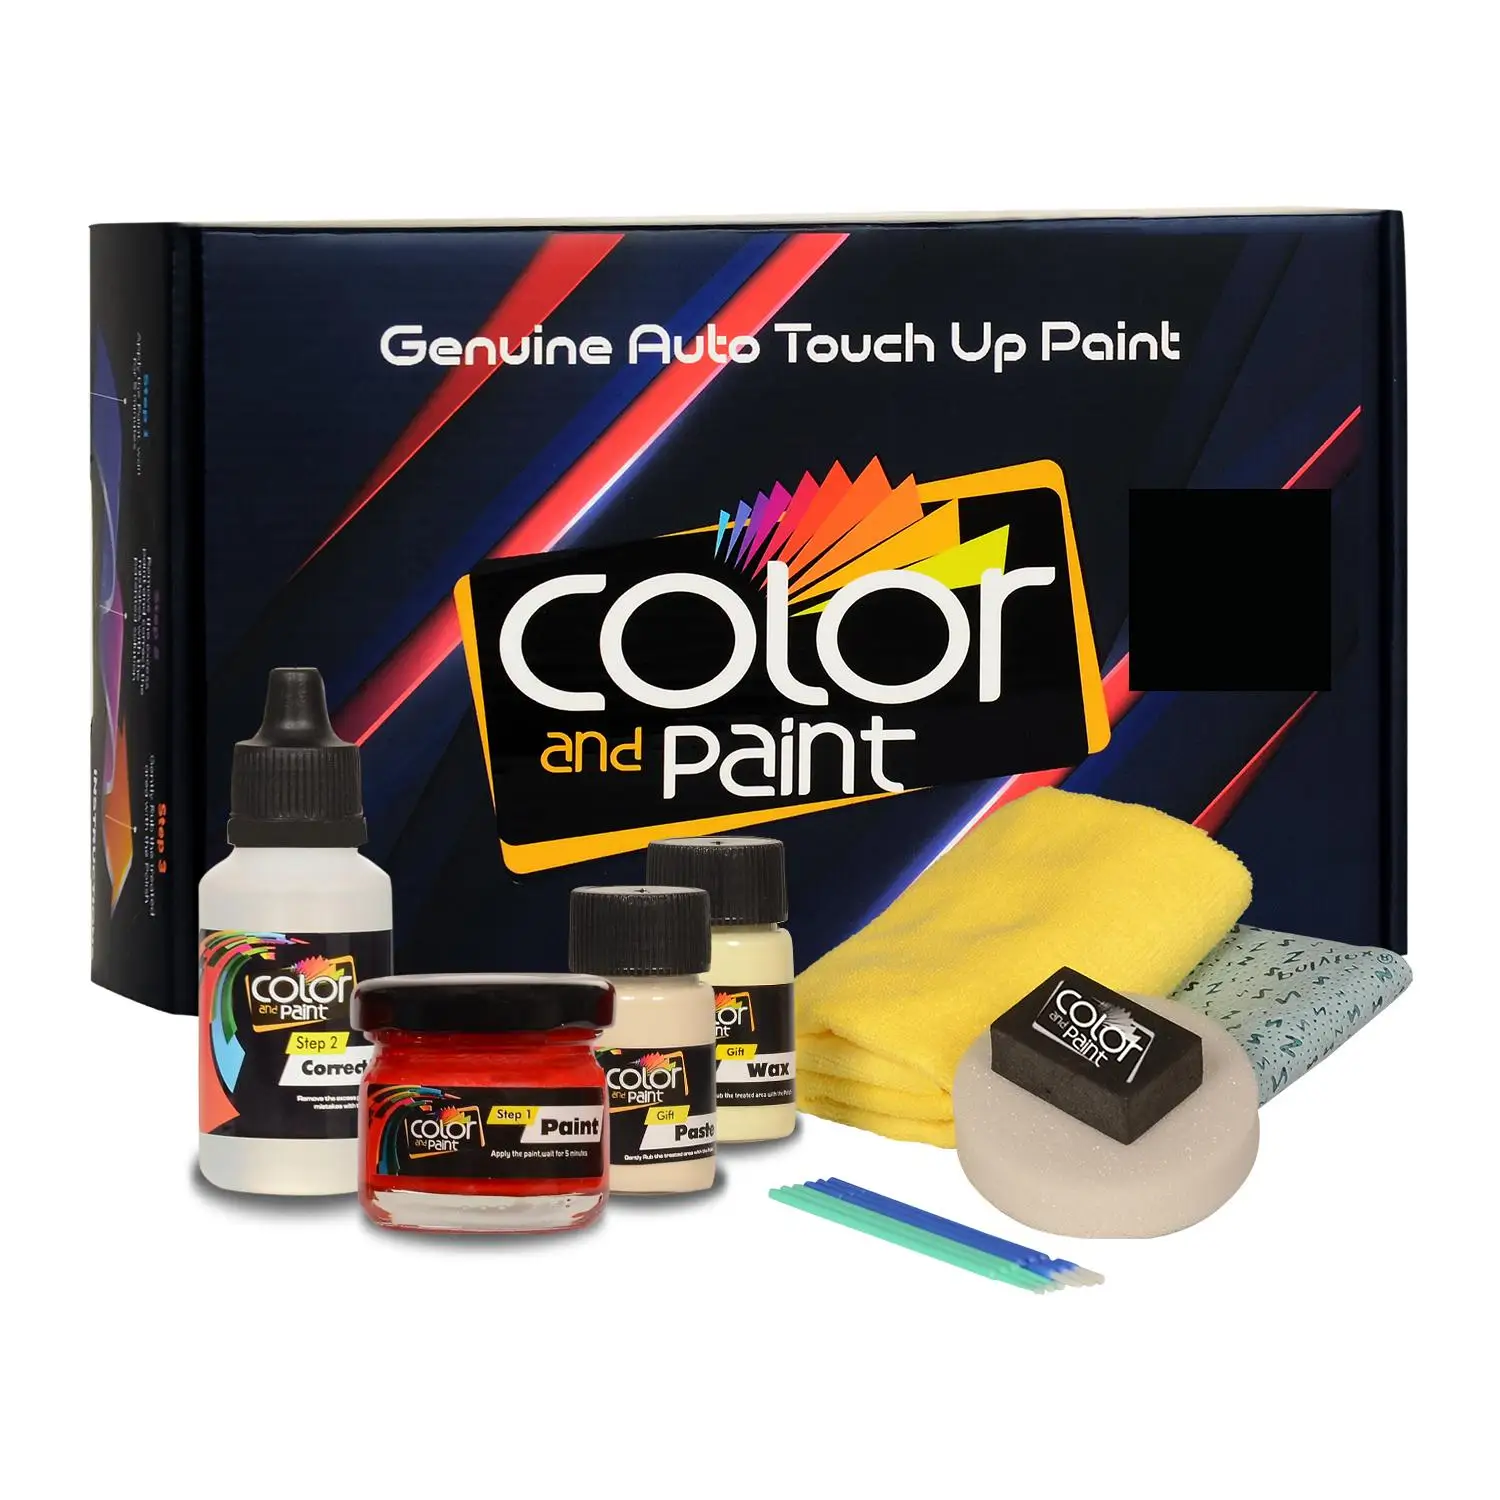 

Color and Paint compatible with Fiat Automotive Touch Up Paint - VERDE YORK - 344 - Basic Care